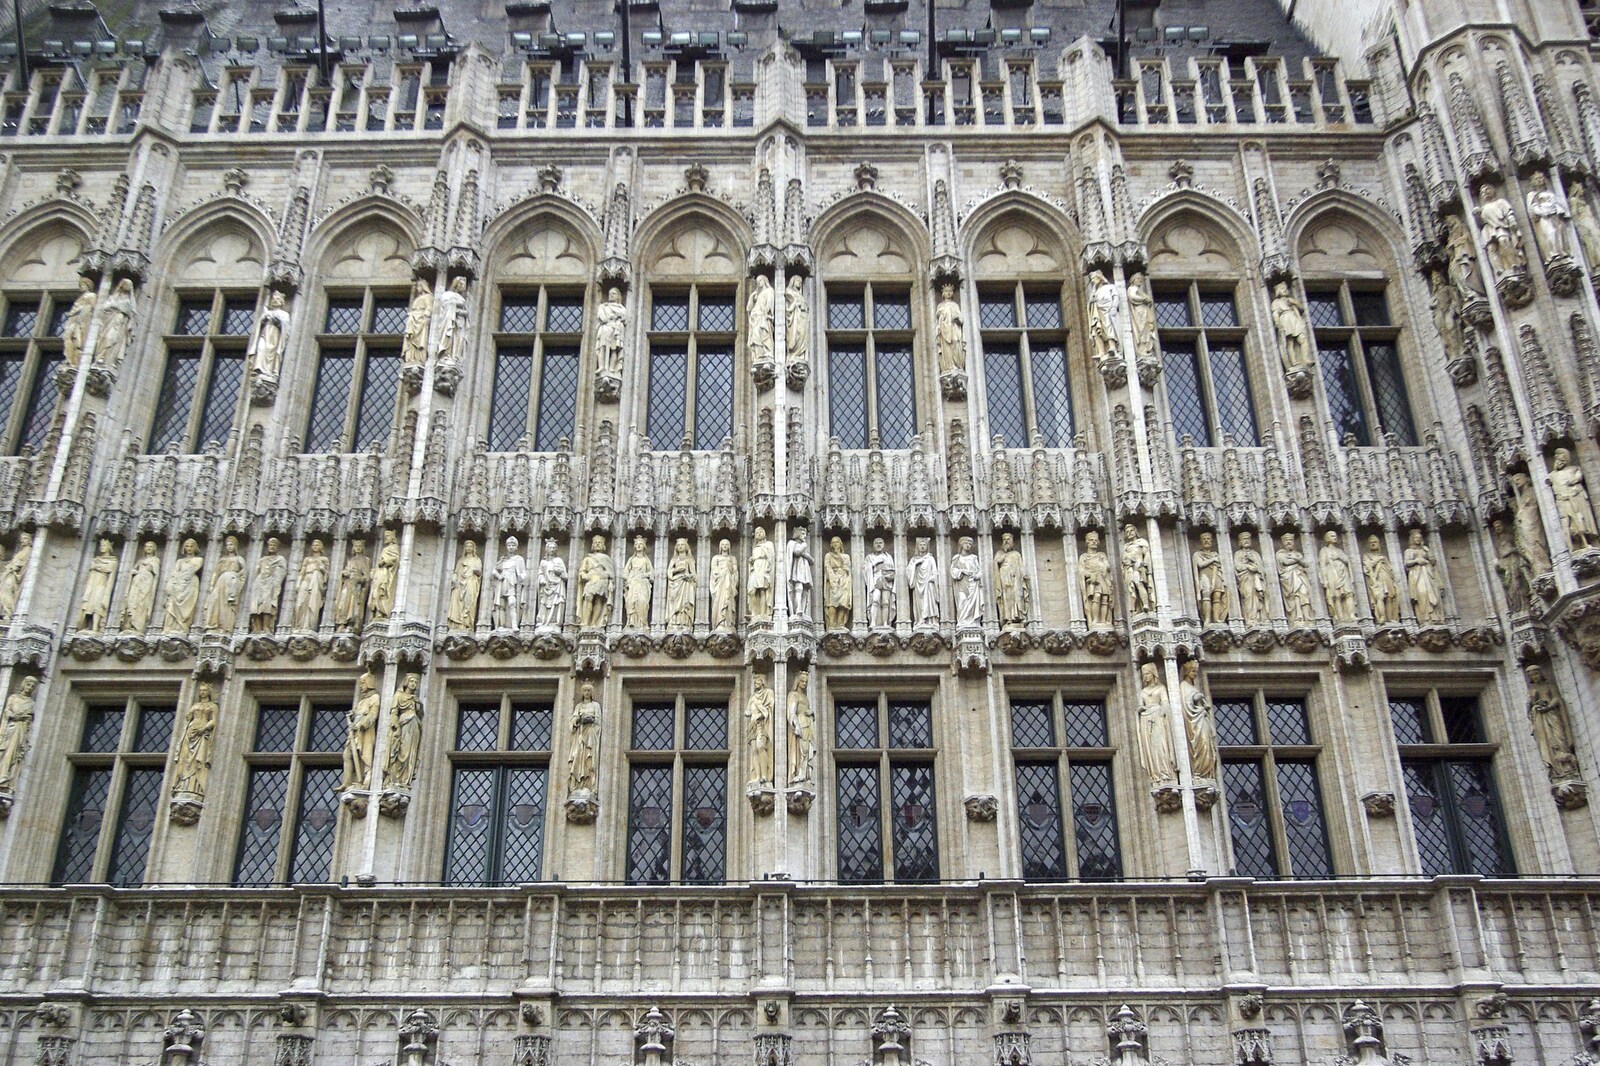 Part of the L'Hôtel De Ville in the Grand Place from The Christmas Markets of Brussels, Belgium - 1st January 2007